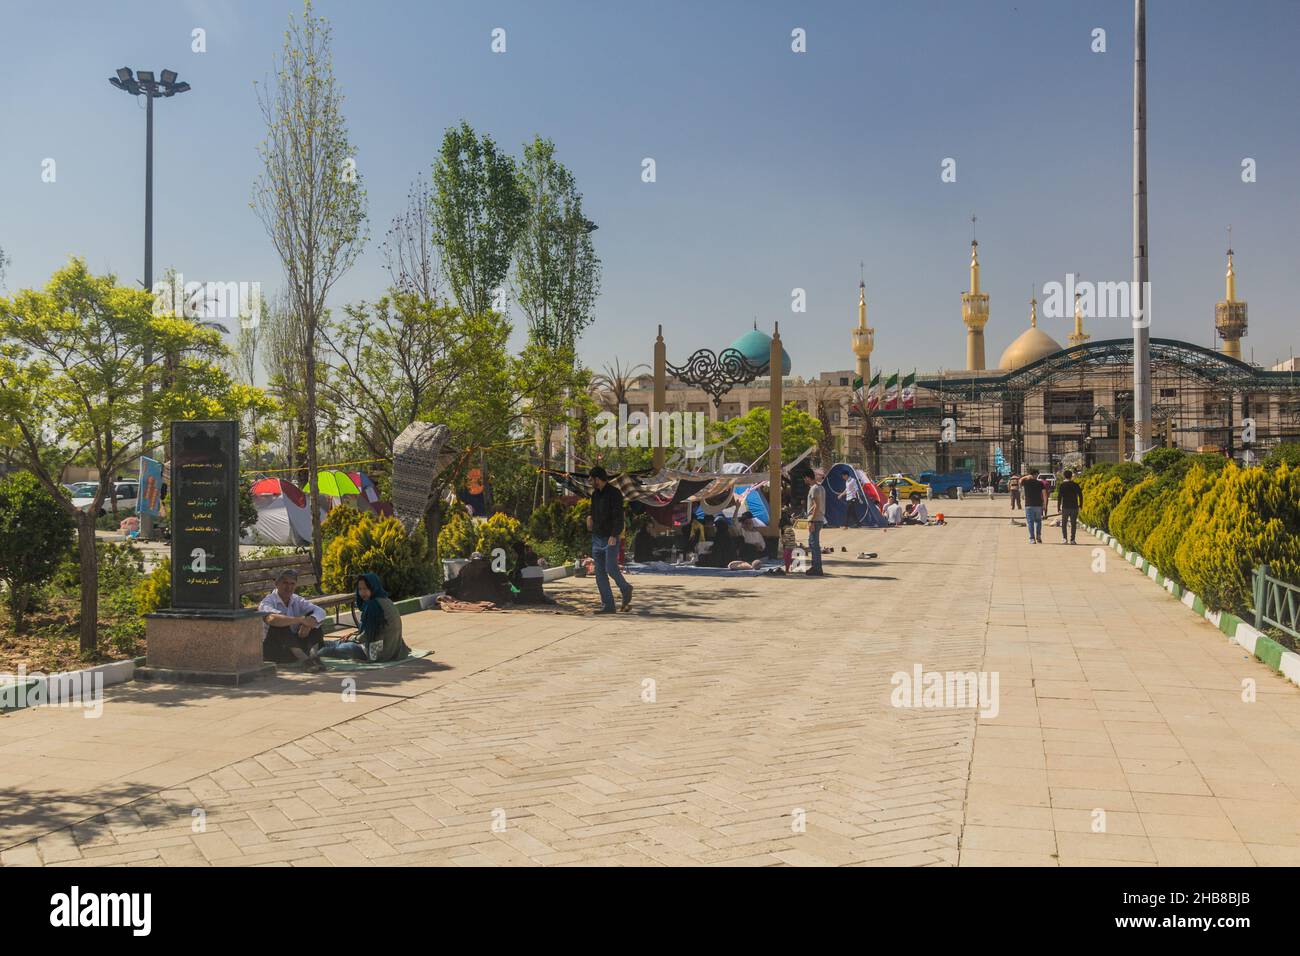 TEHRAN, IRAN - APRIL 2, 2018: People are camping in the park around Mausoleum of Ruhollah Khomeini near Tehran during the Nowruz New Year celebrations Stock Photo